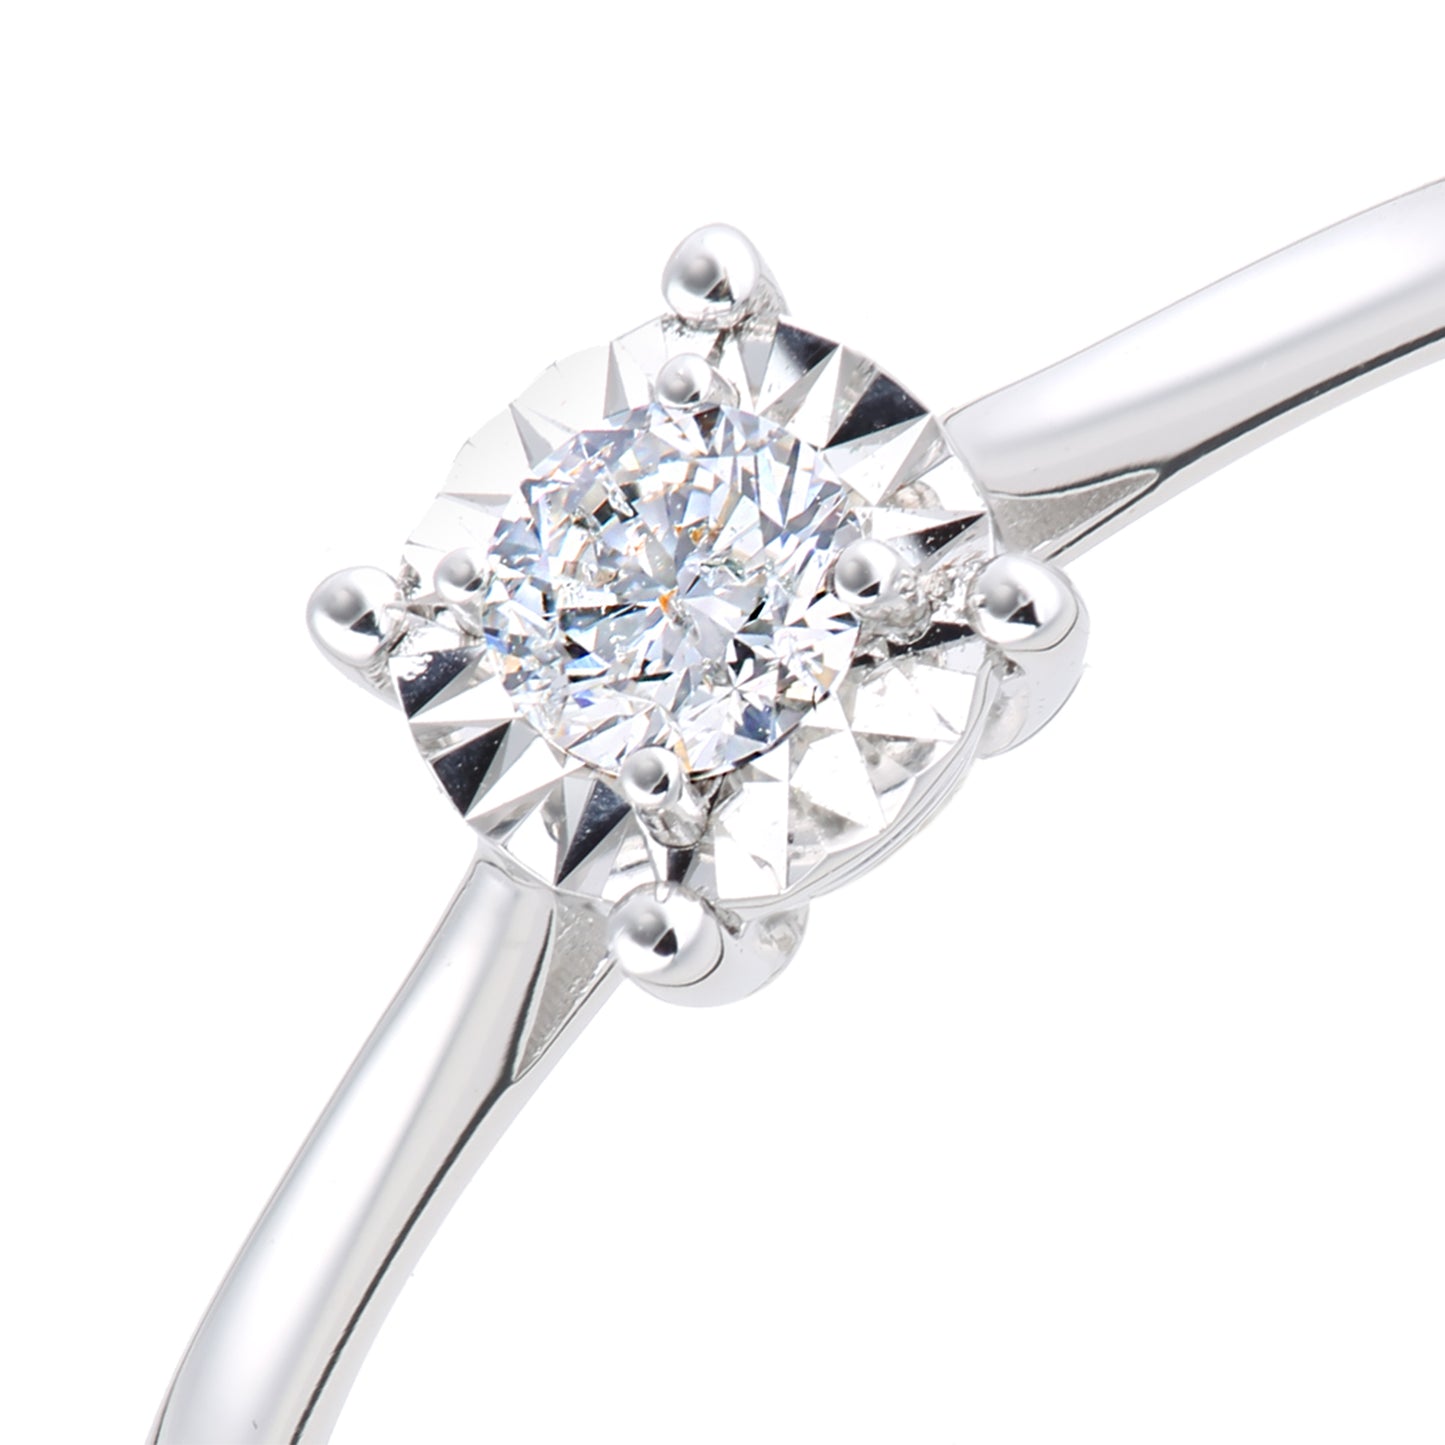 18ct White Gold  15pts Diamond Illusion Solitaire Engagement Ring - PR1AXL2736W18